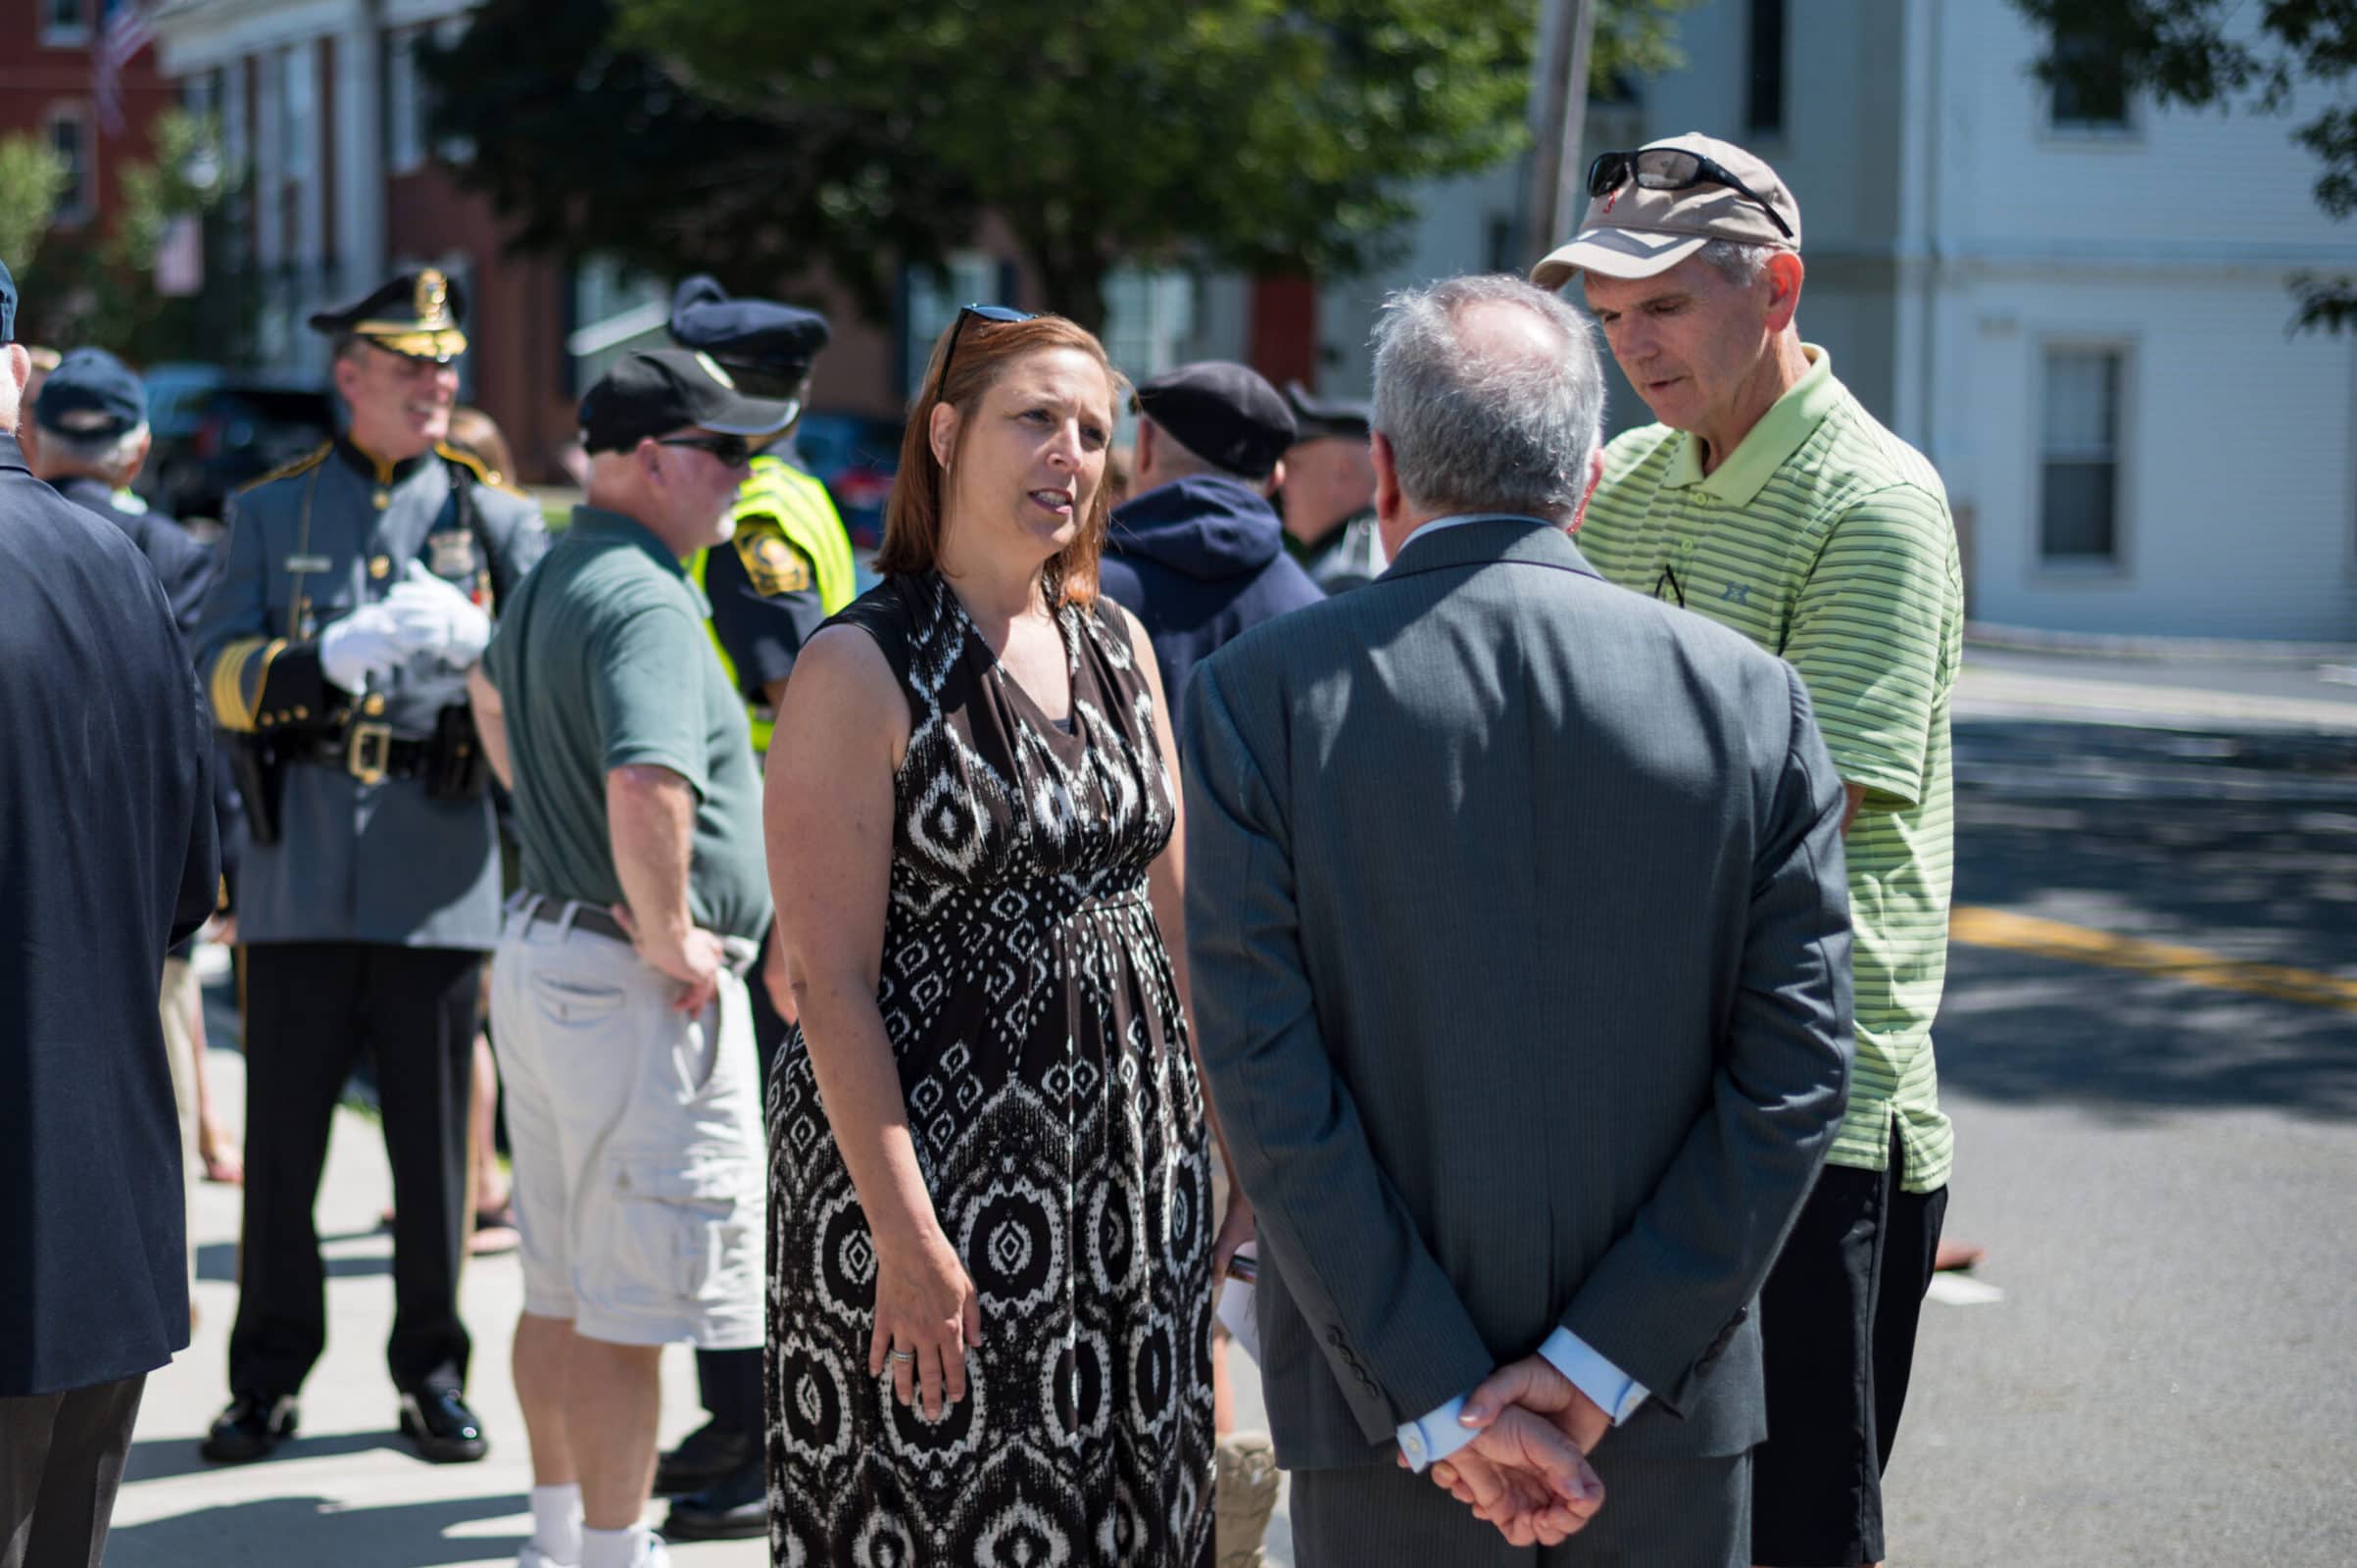 Attendees of a plaque dedication ceremony in honor of Westborough’s Michael Haskell mingle in front of the Forbes Municipal Building in town. (Photo/Jesse Kucewicz)